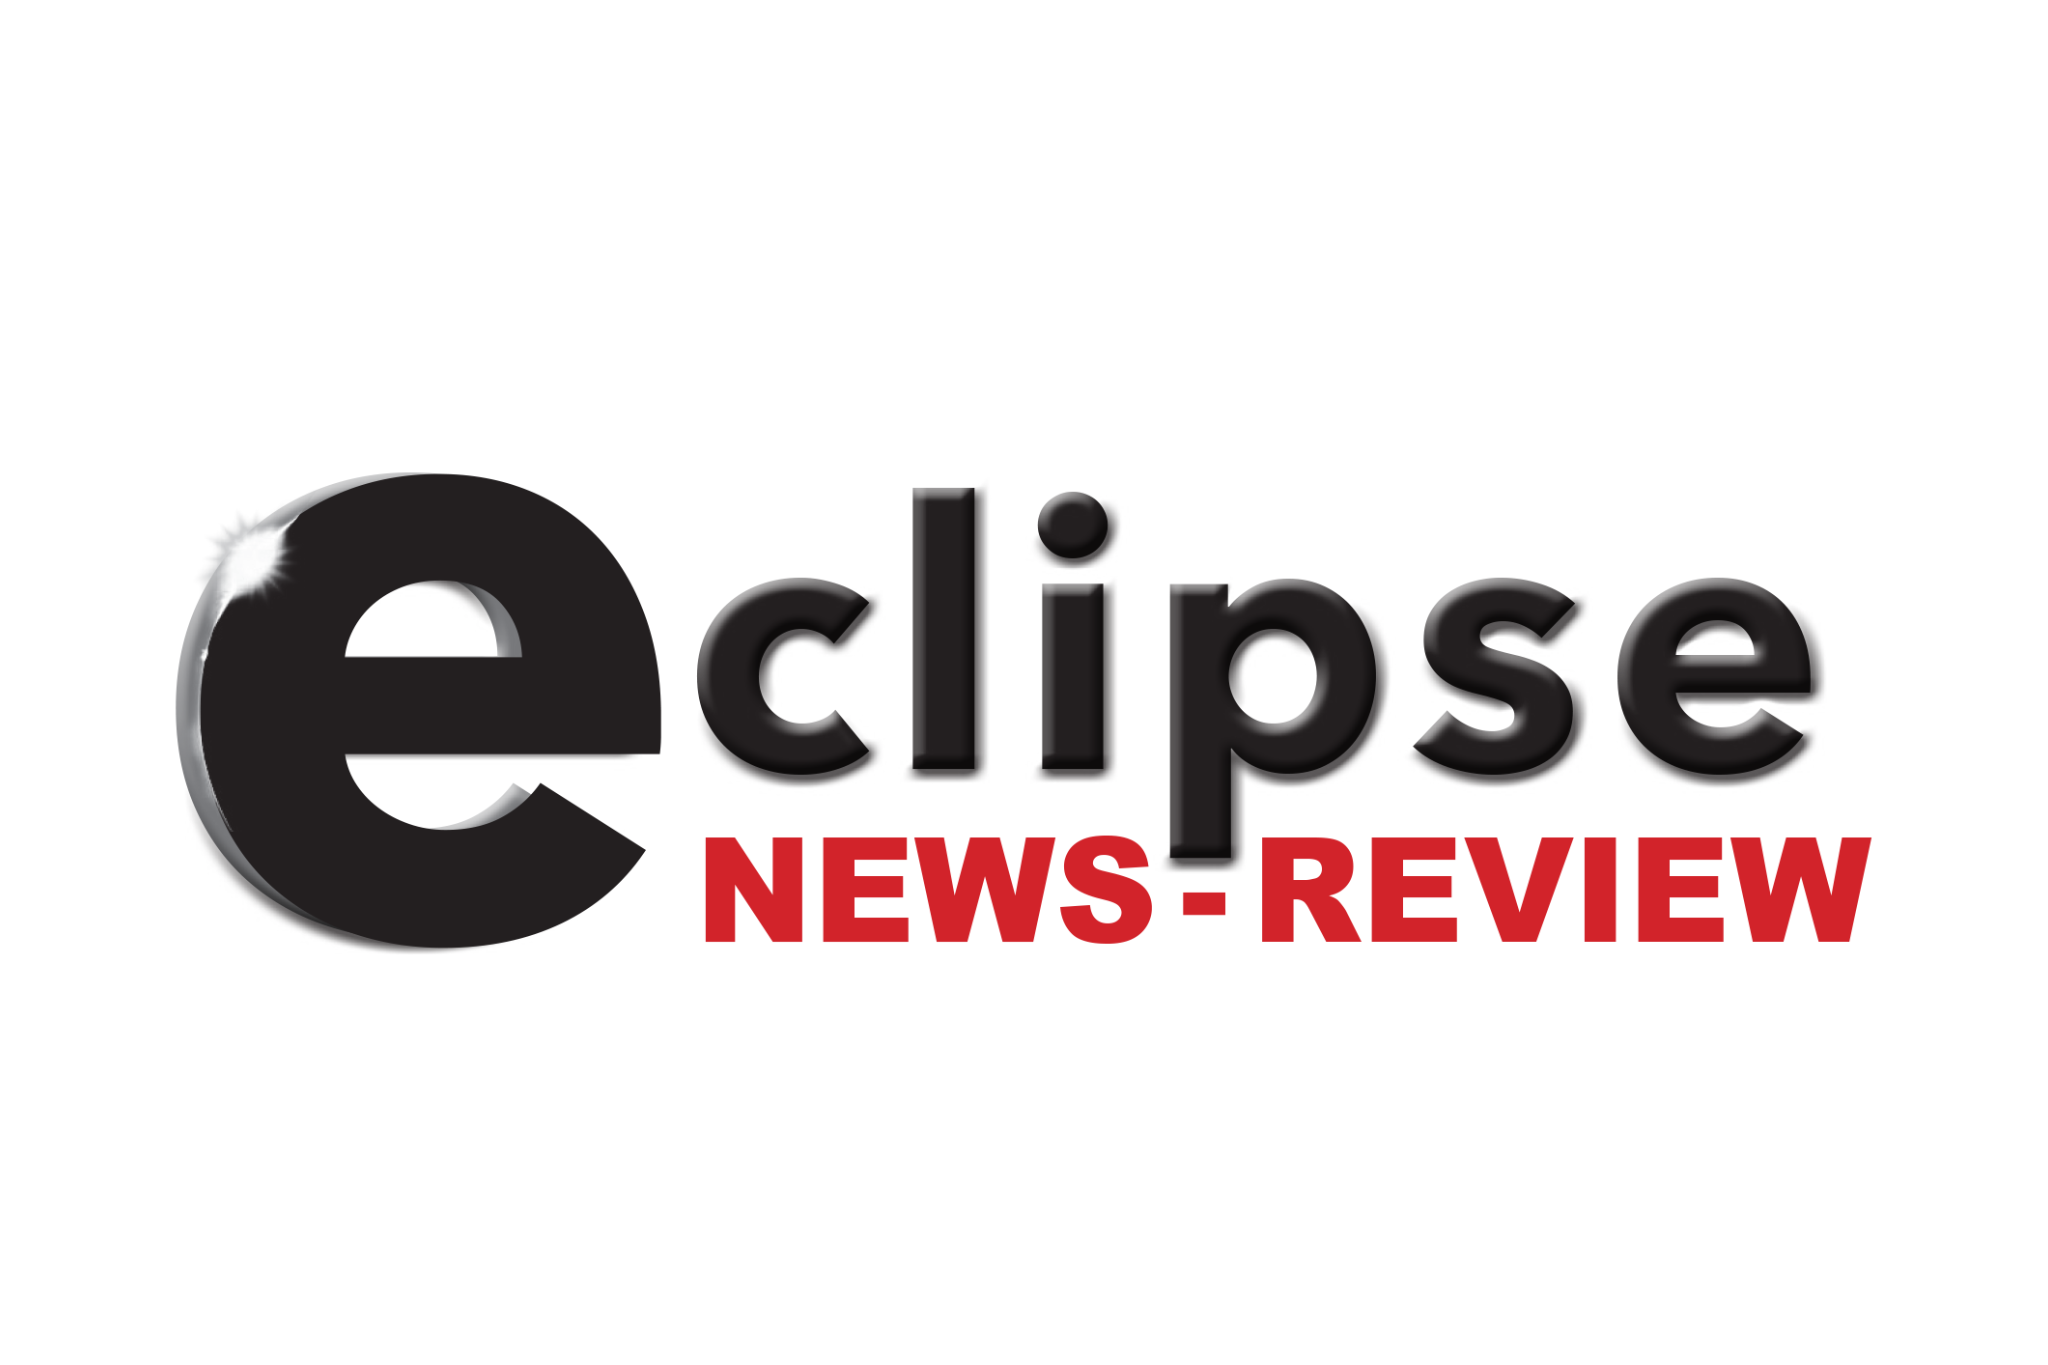 2020 The Year in Review Parkersburg Eclipse NewsReview